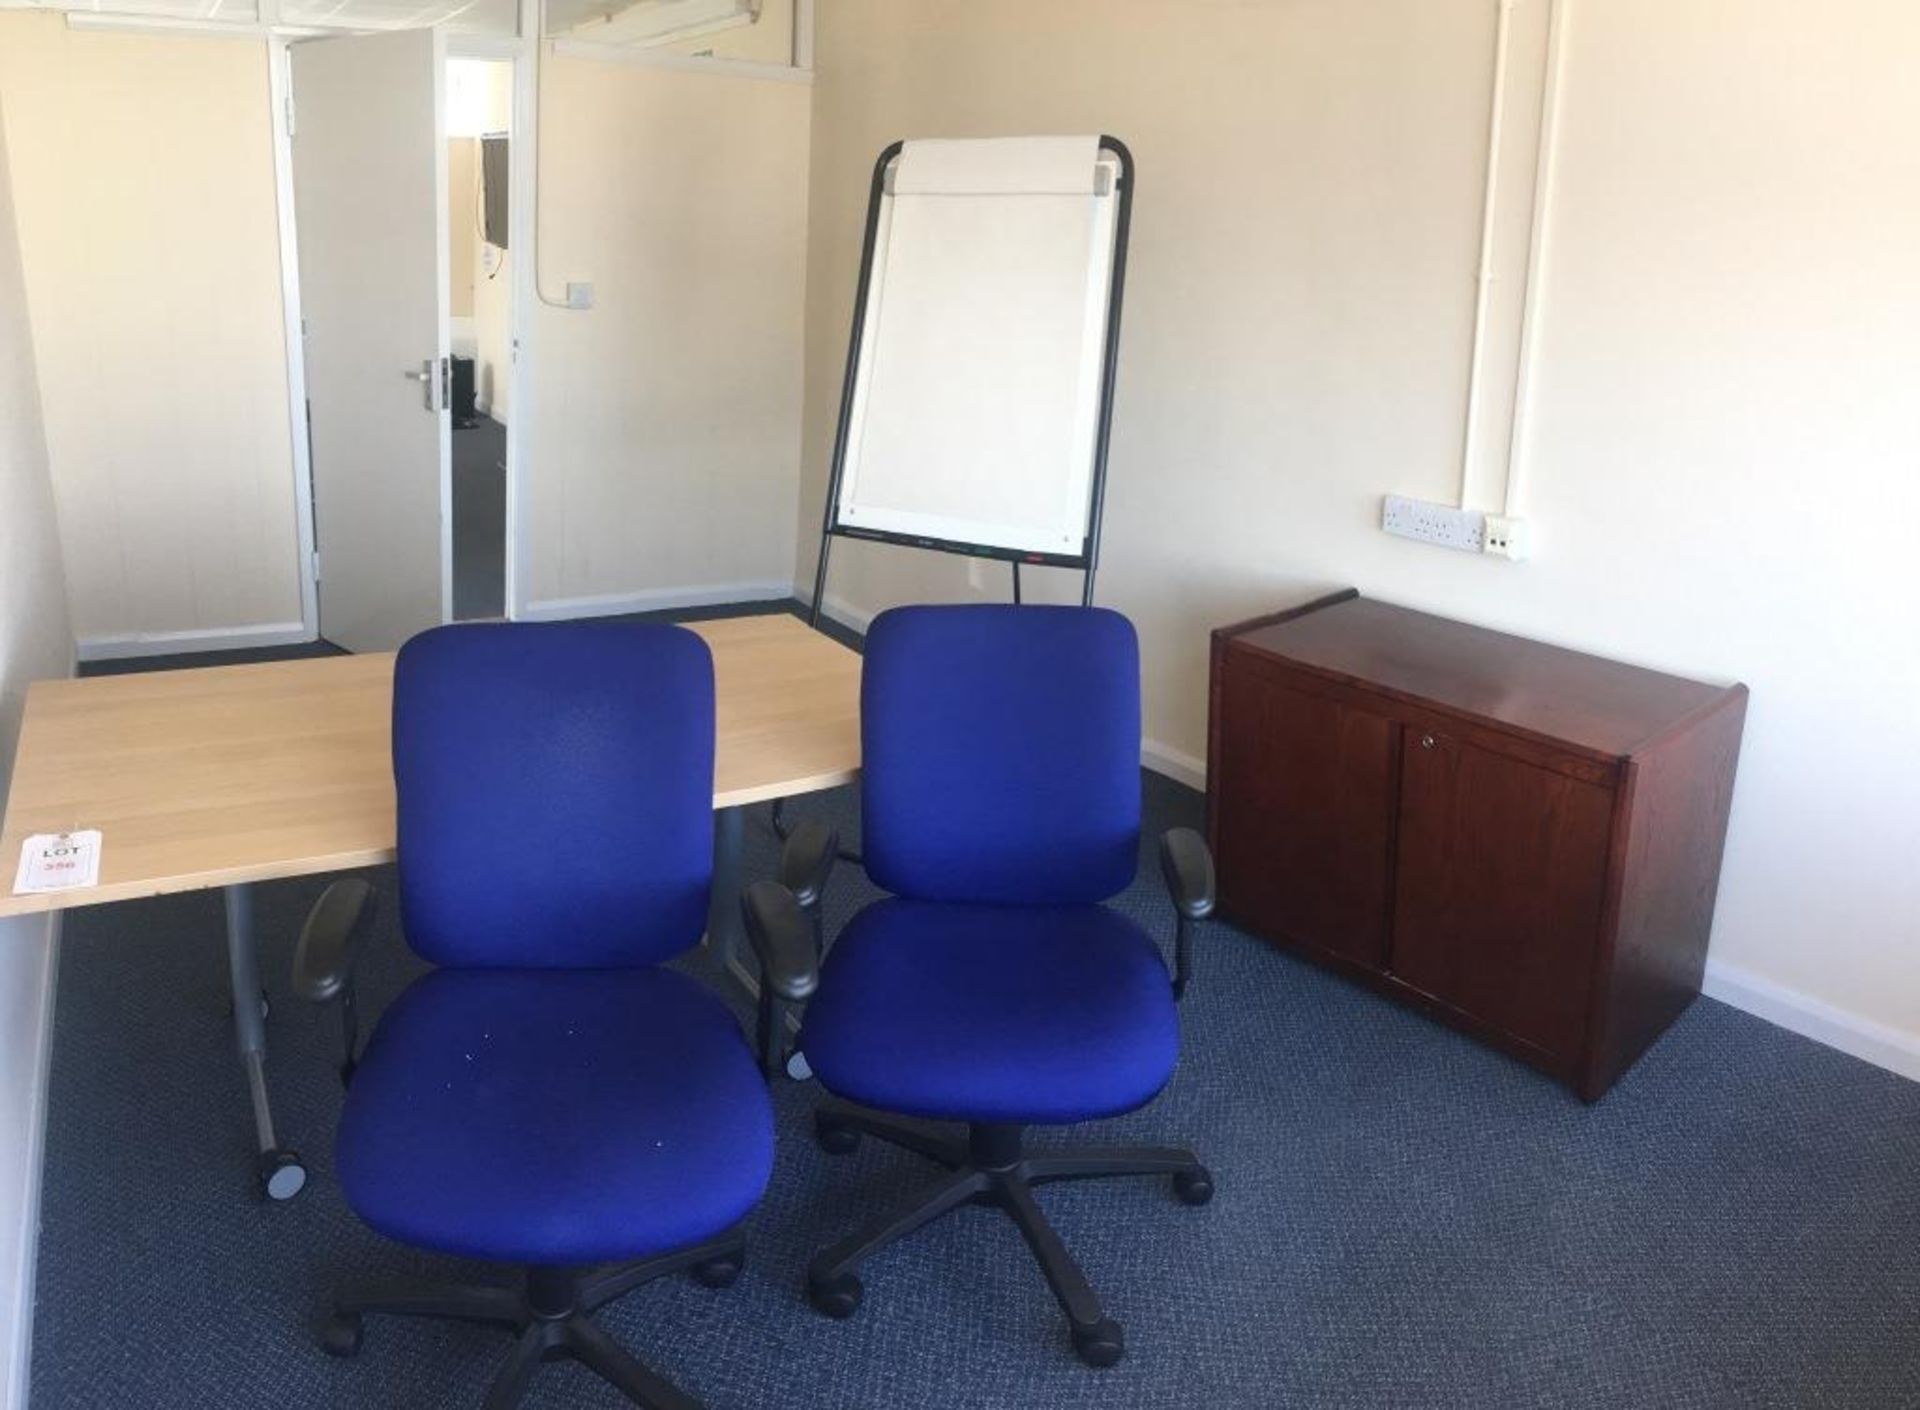 Two swivel chairs, a 2-door cabinet, a flip chart and a light wood veneer table